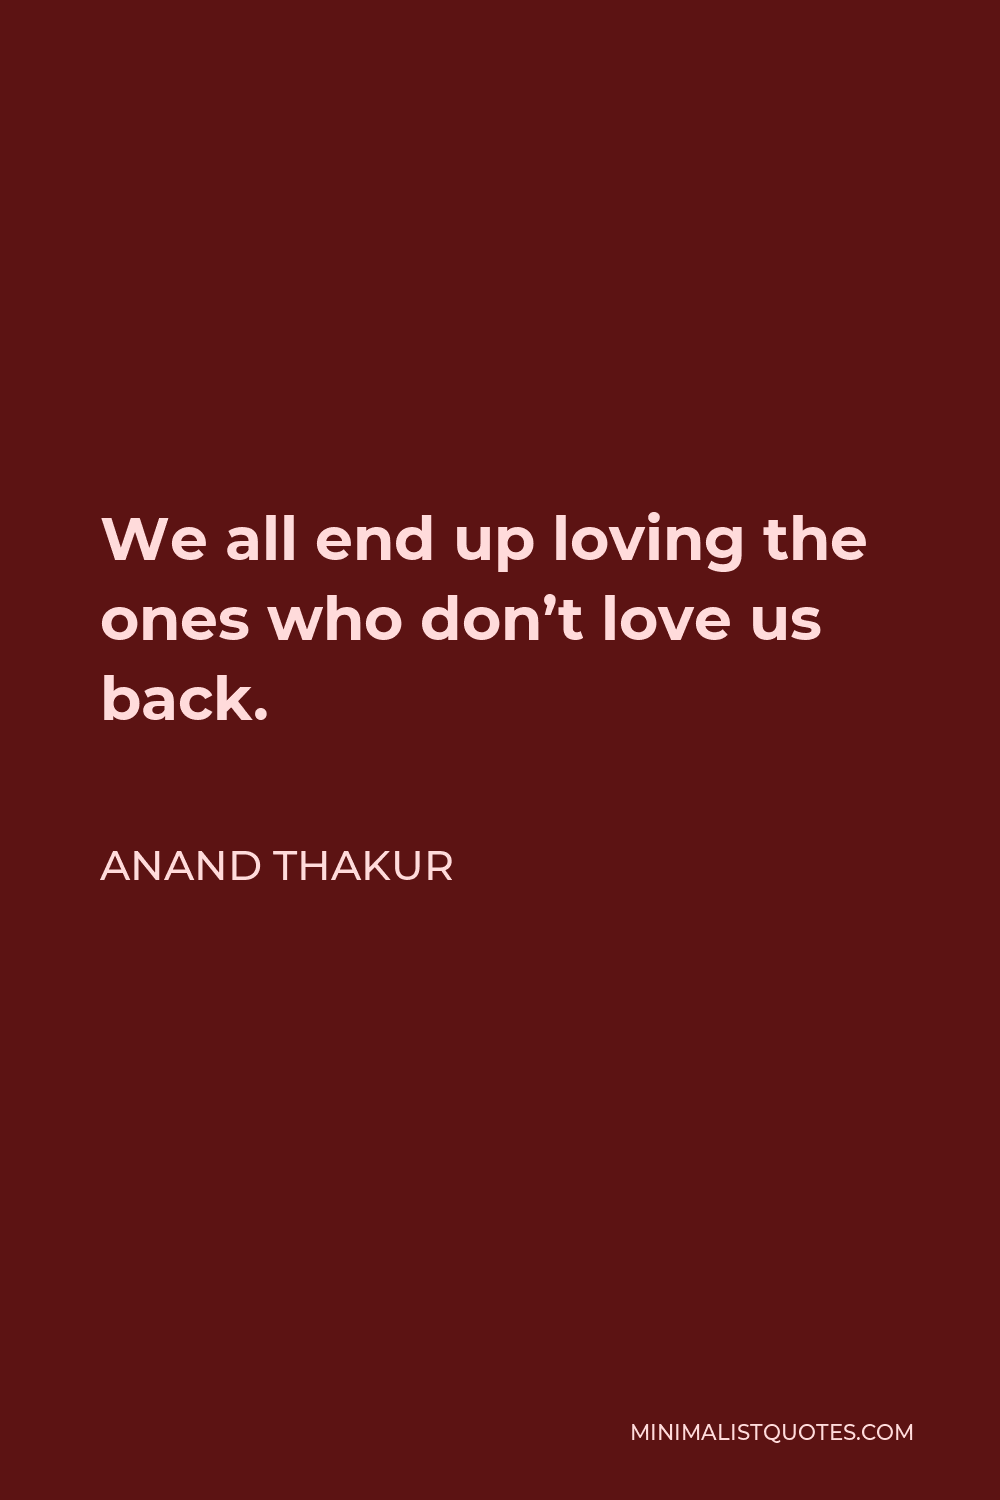 Anand Thakur Quote - We all end up loving the ones who don’t love us back. 